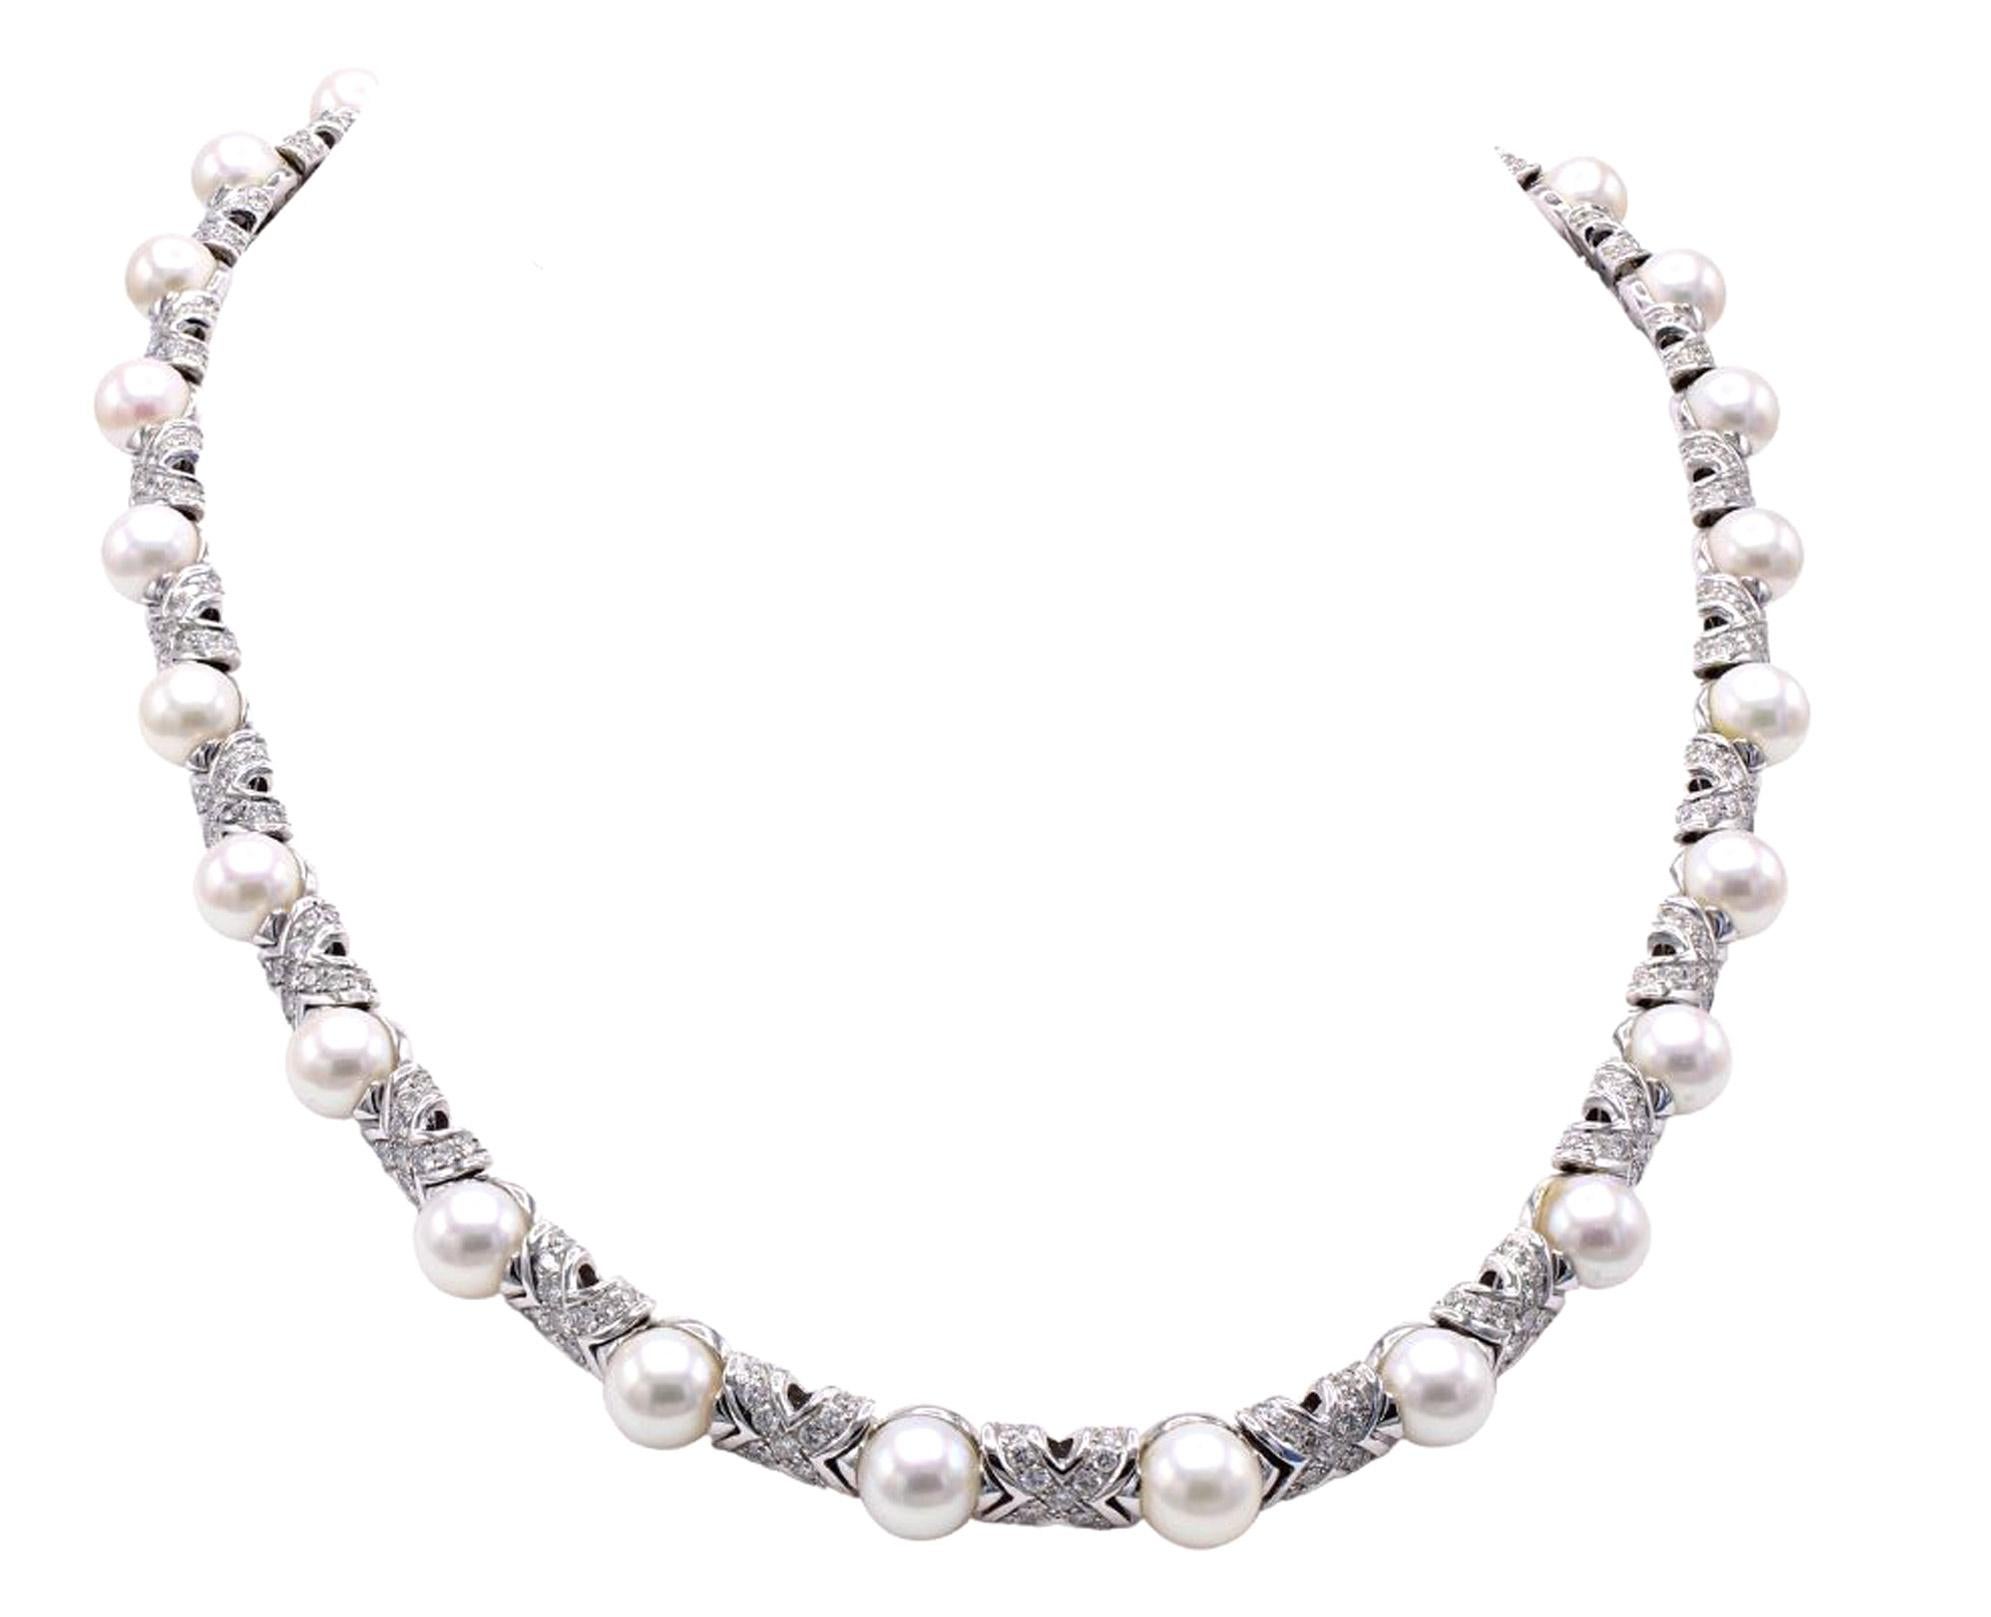 Beautifully designed and masterfully handcrafted by the iconic Italian jewelry house Bulgari, this wonderful necklace features bright white and sparkly round brilliant cut diamonds embellished by white lustrous pearls all set in 18 karat white gold.